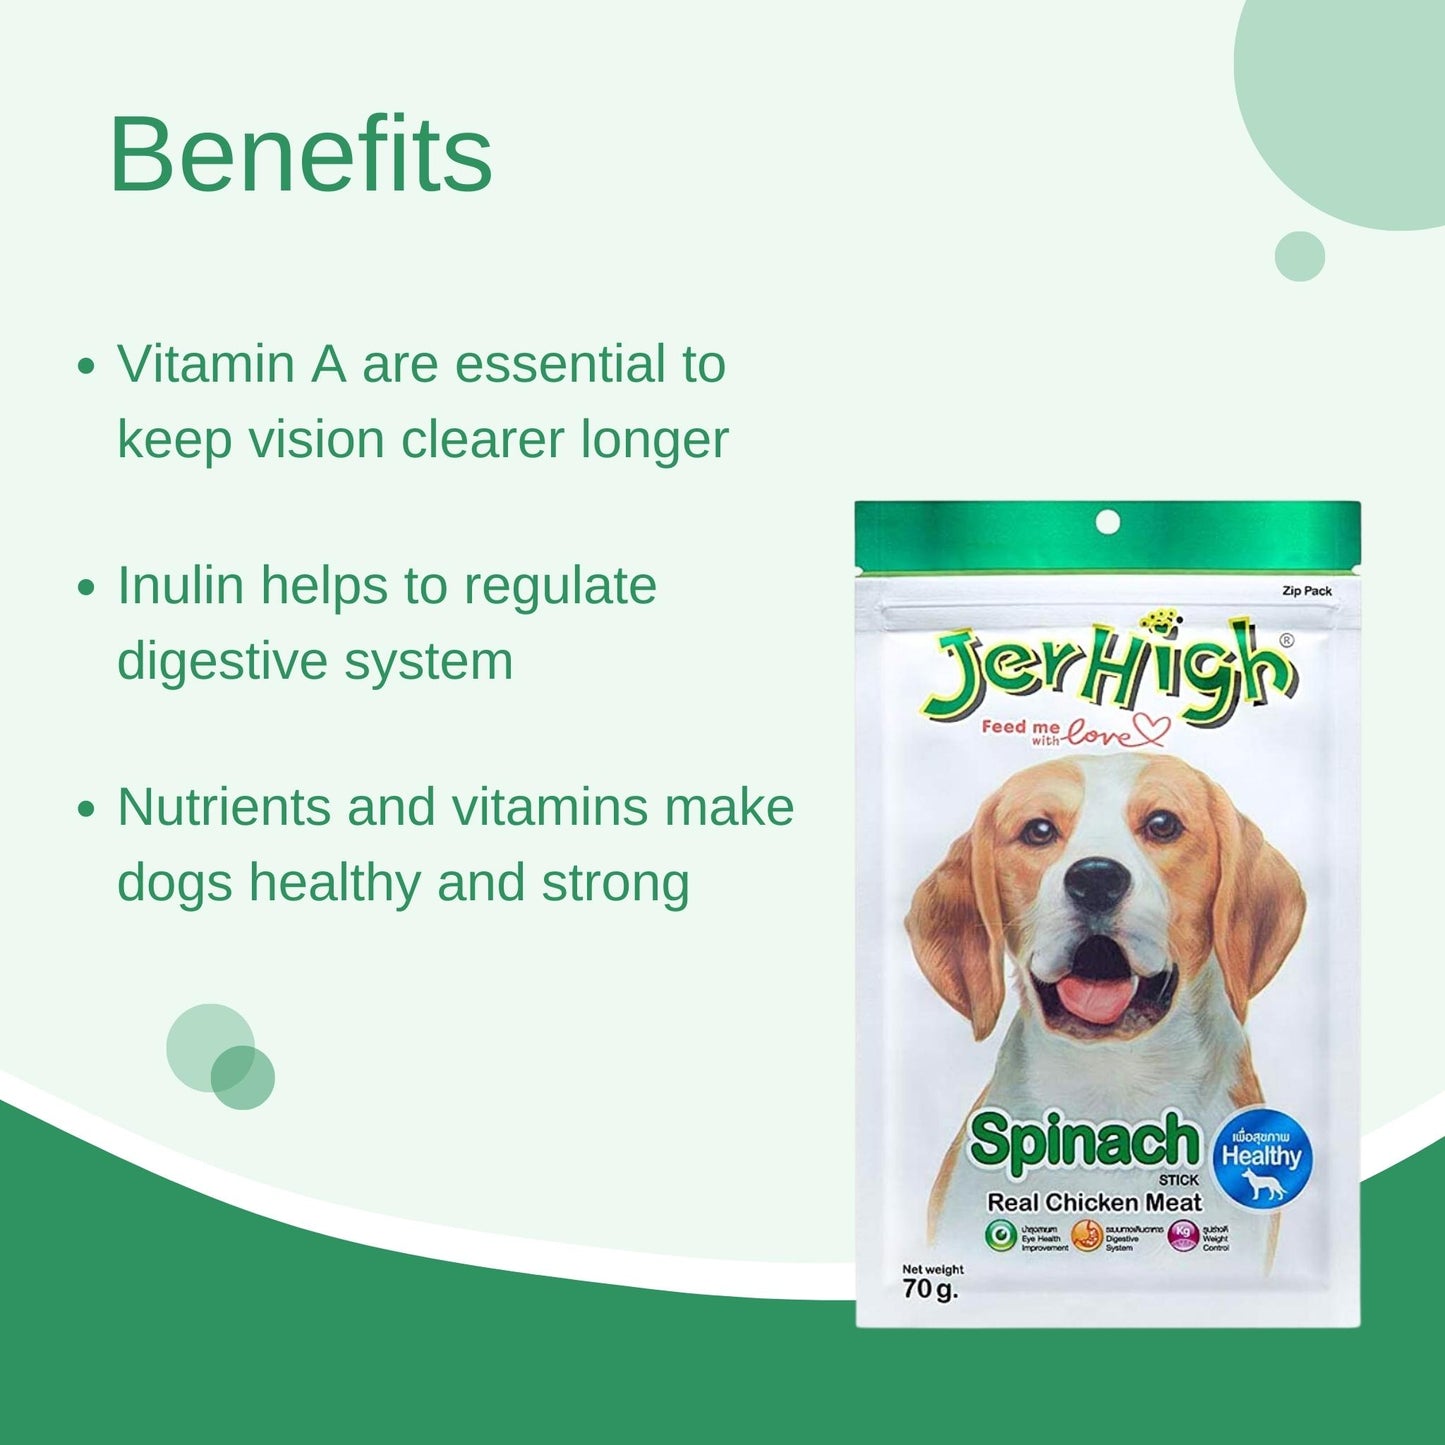 JerHigh Spinach Stick Dog Treat with Real Chicken Meat - 70gm